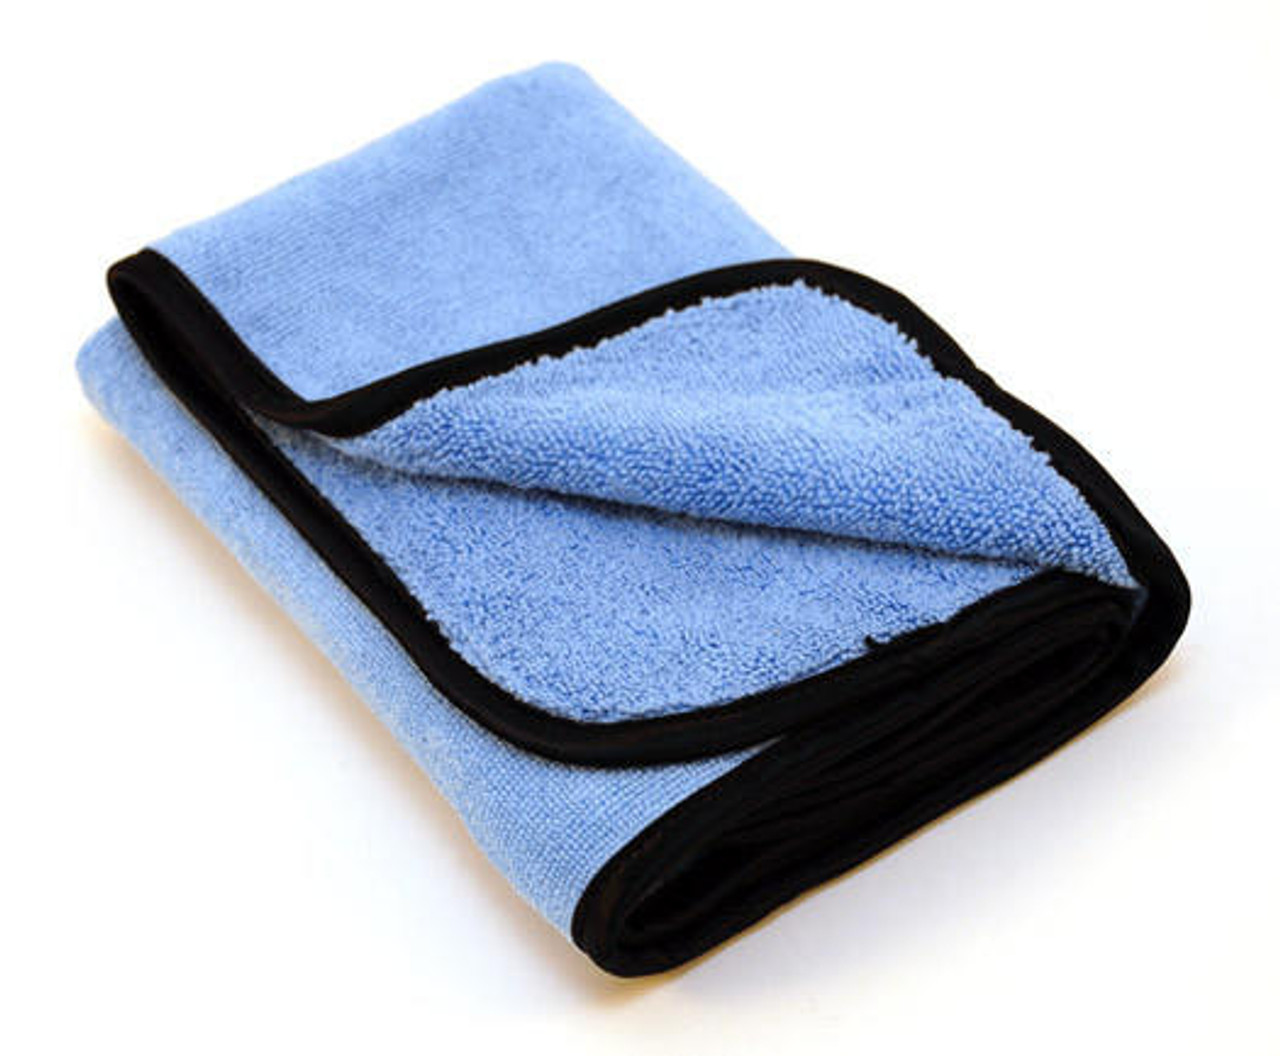 POLYTE Quick Dry Lint Free Microfiber Hand Towel, 16 x 30 in, Set of 4 (Blue)